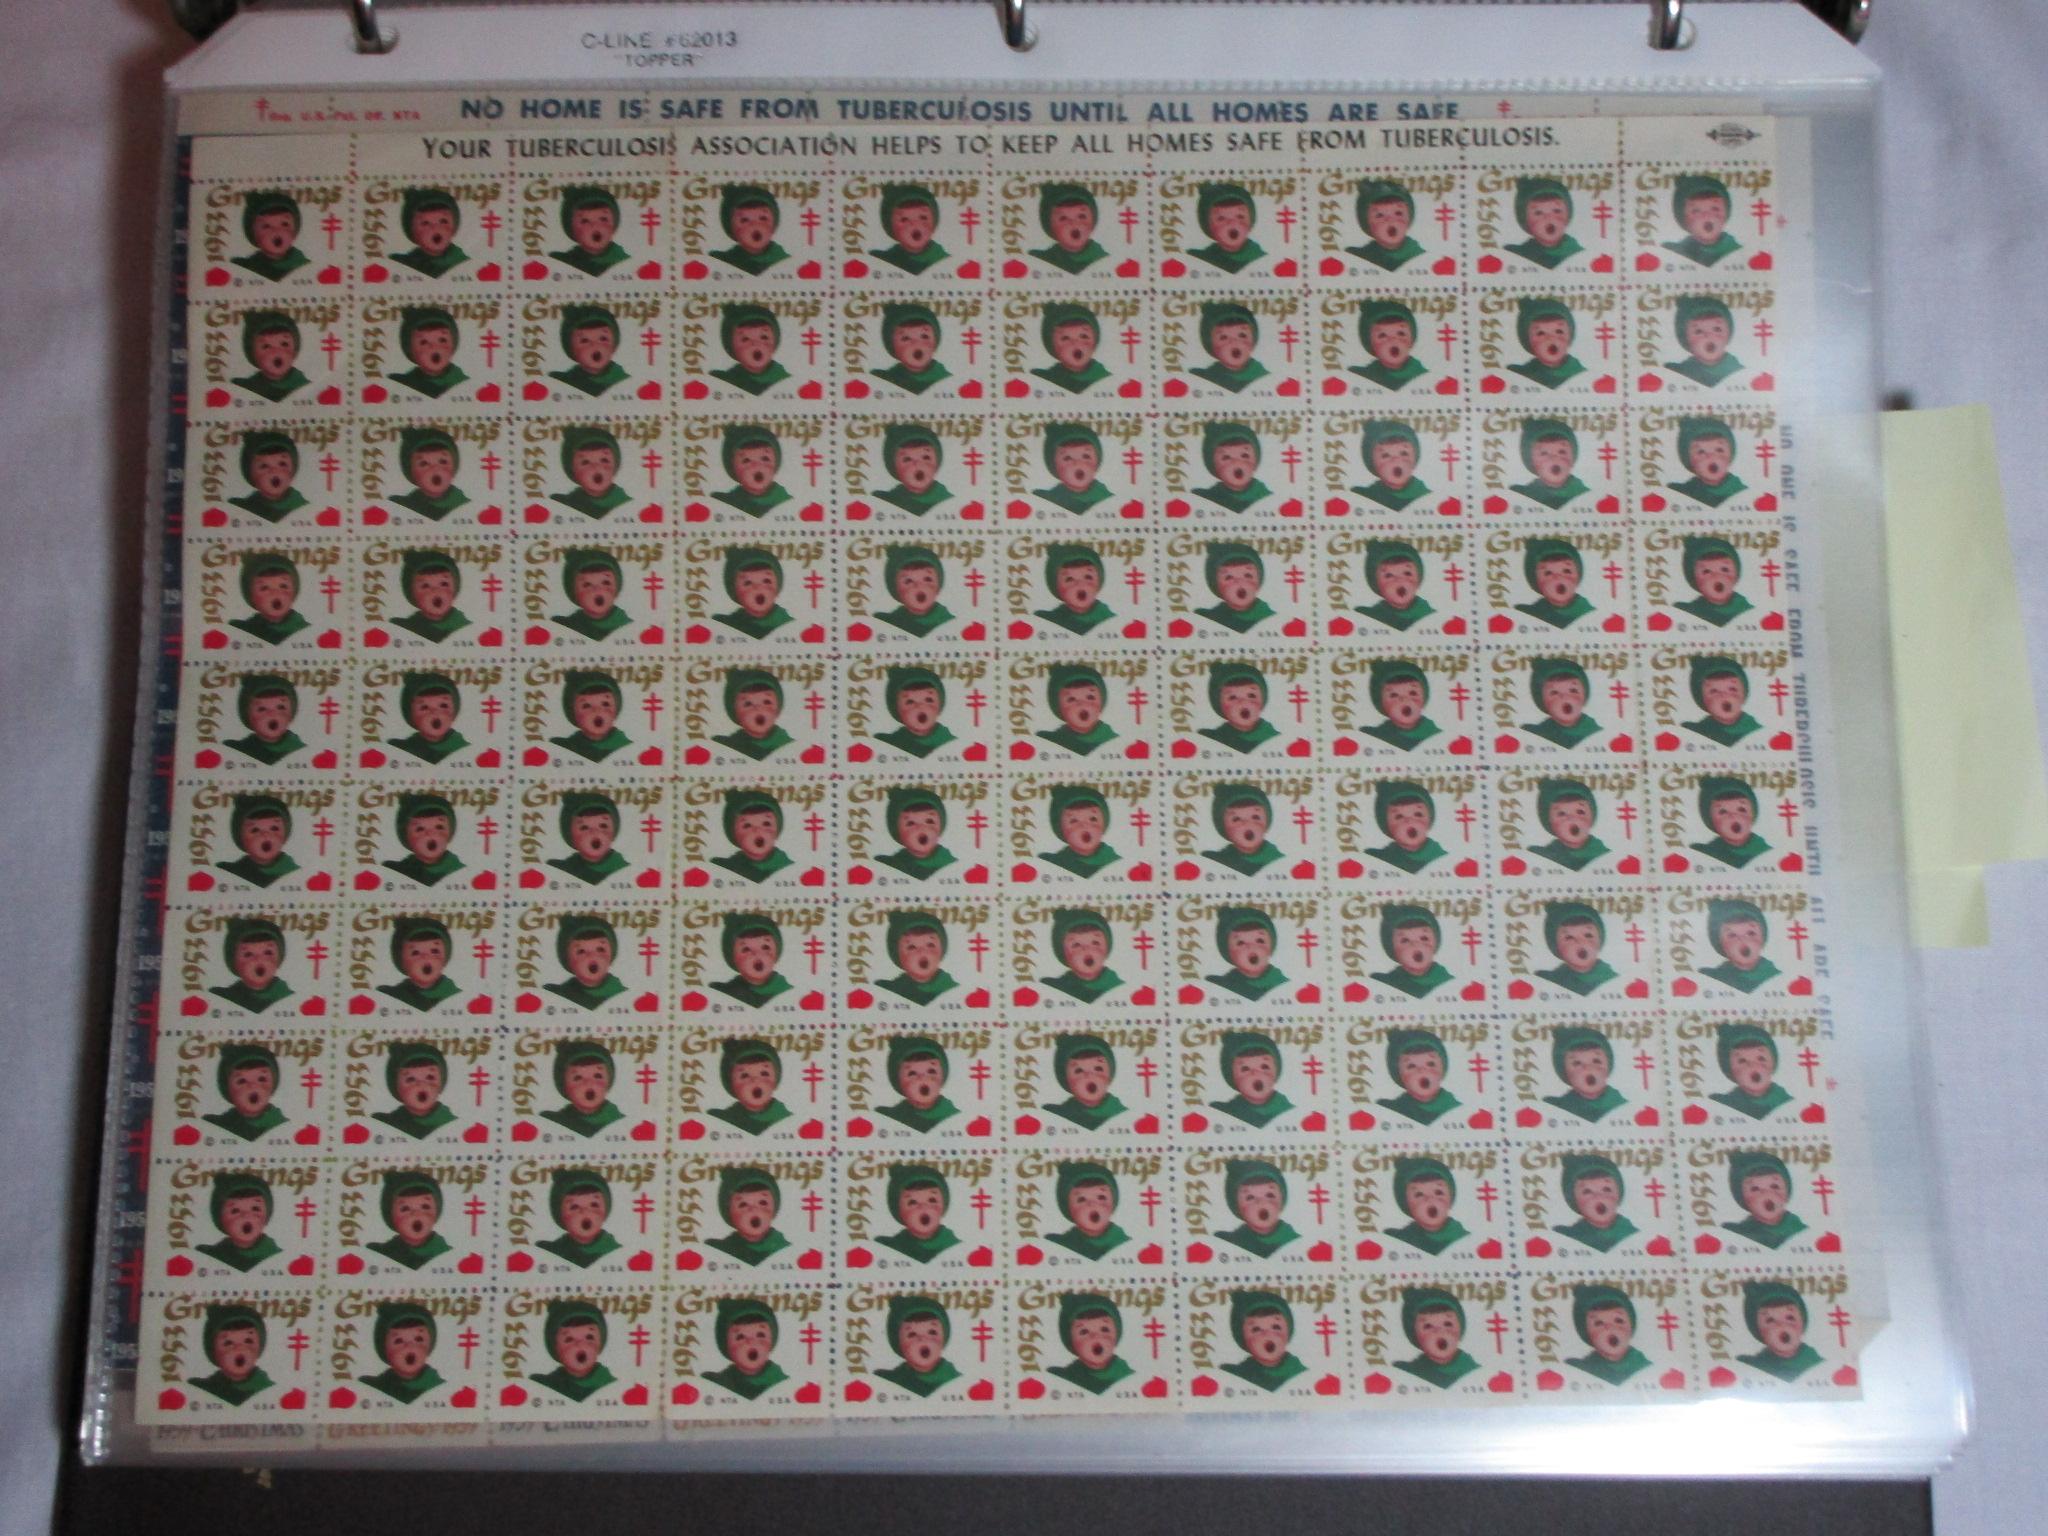 CHRISTMAS SEAL SHEETS FROM THE 1950-1980S